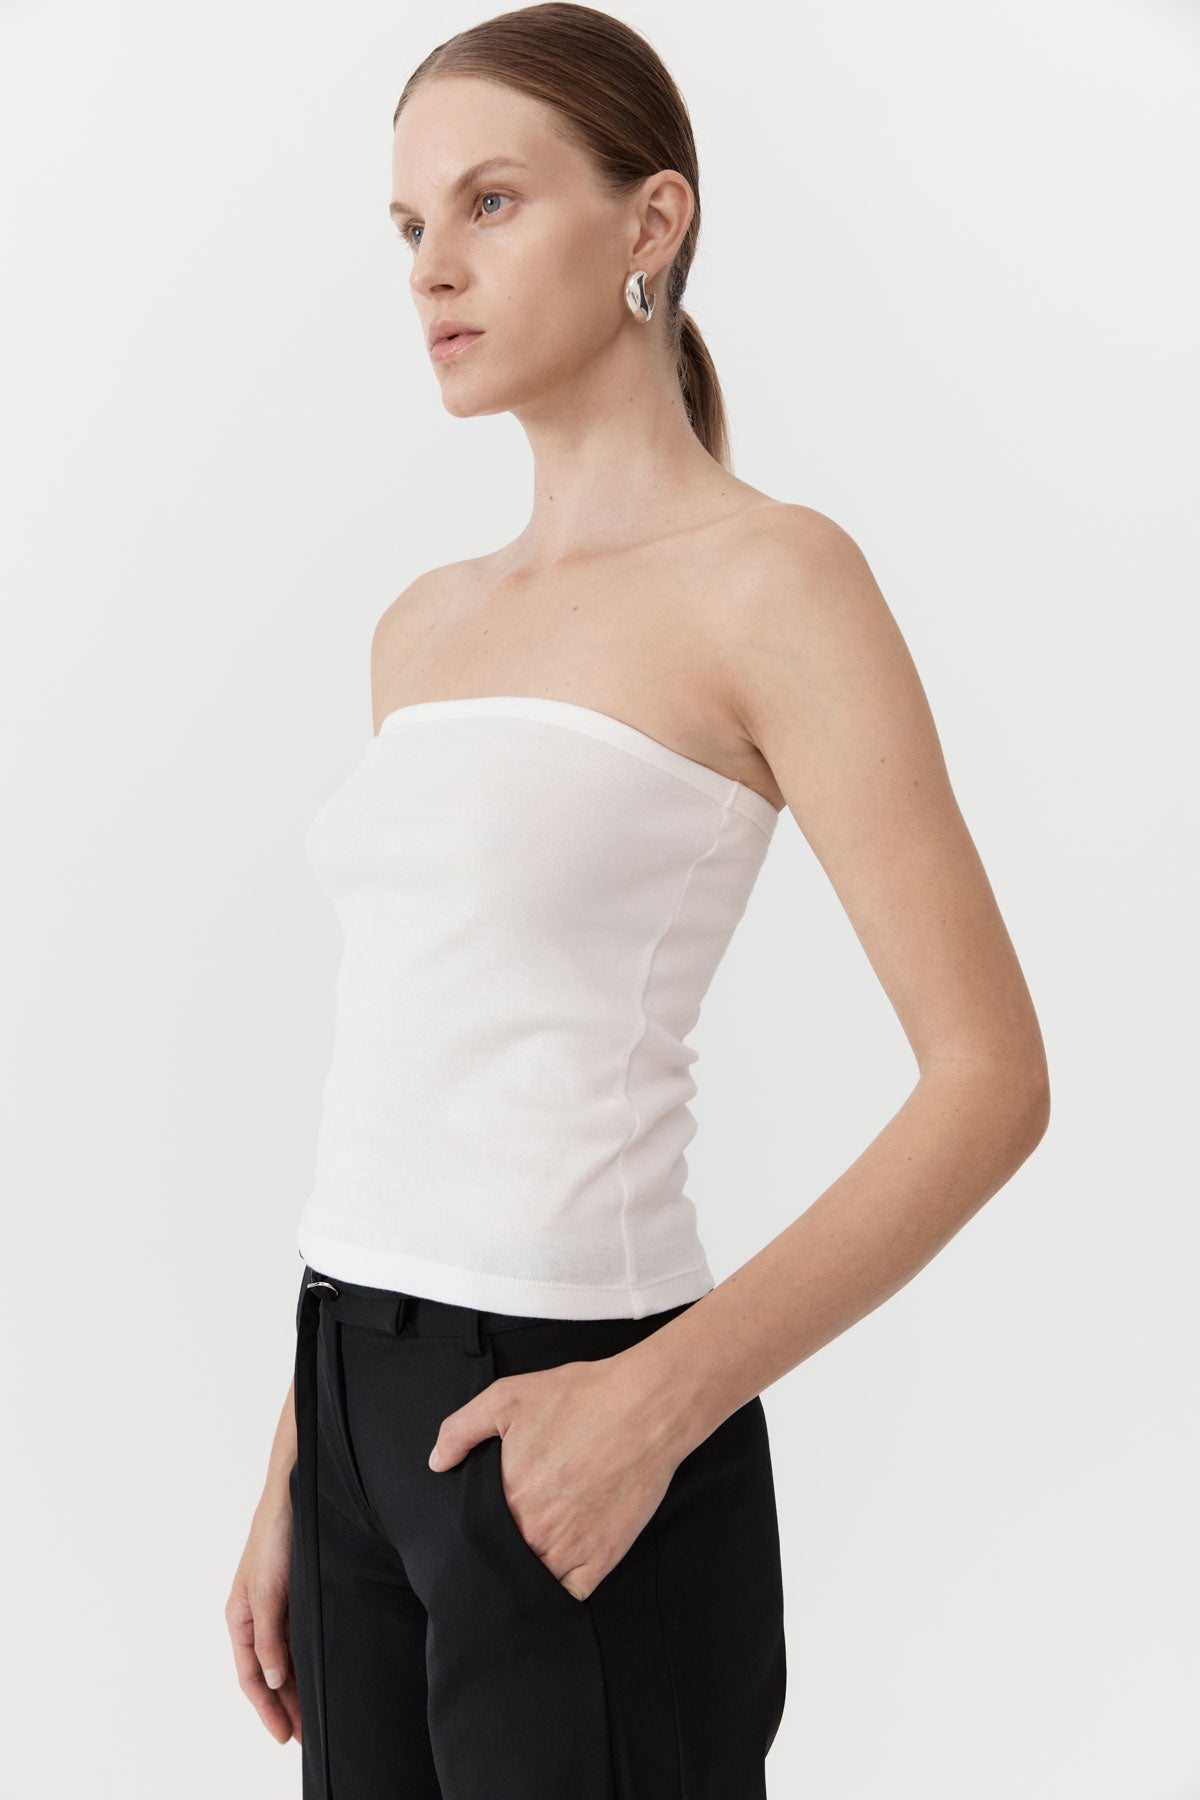 the strapless cotton top